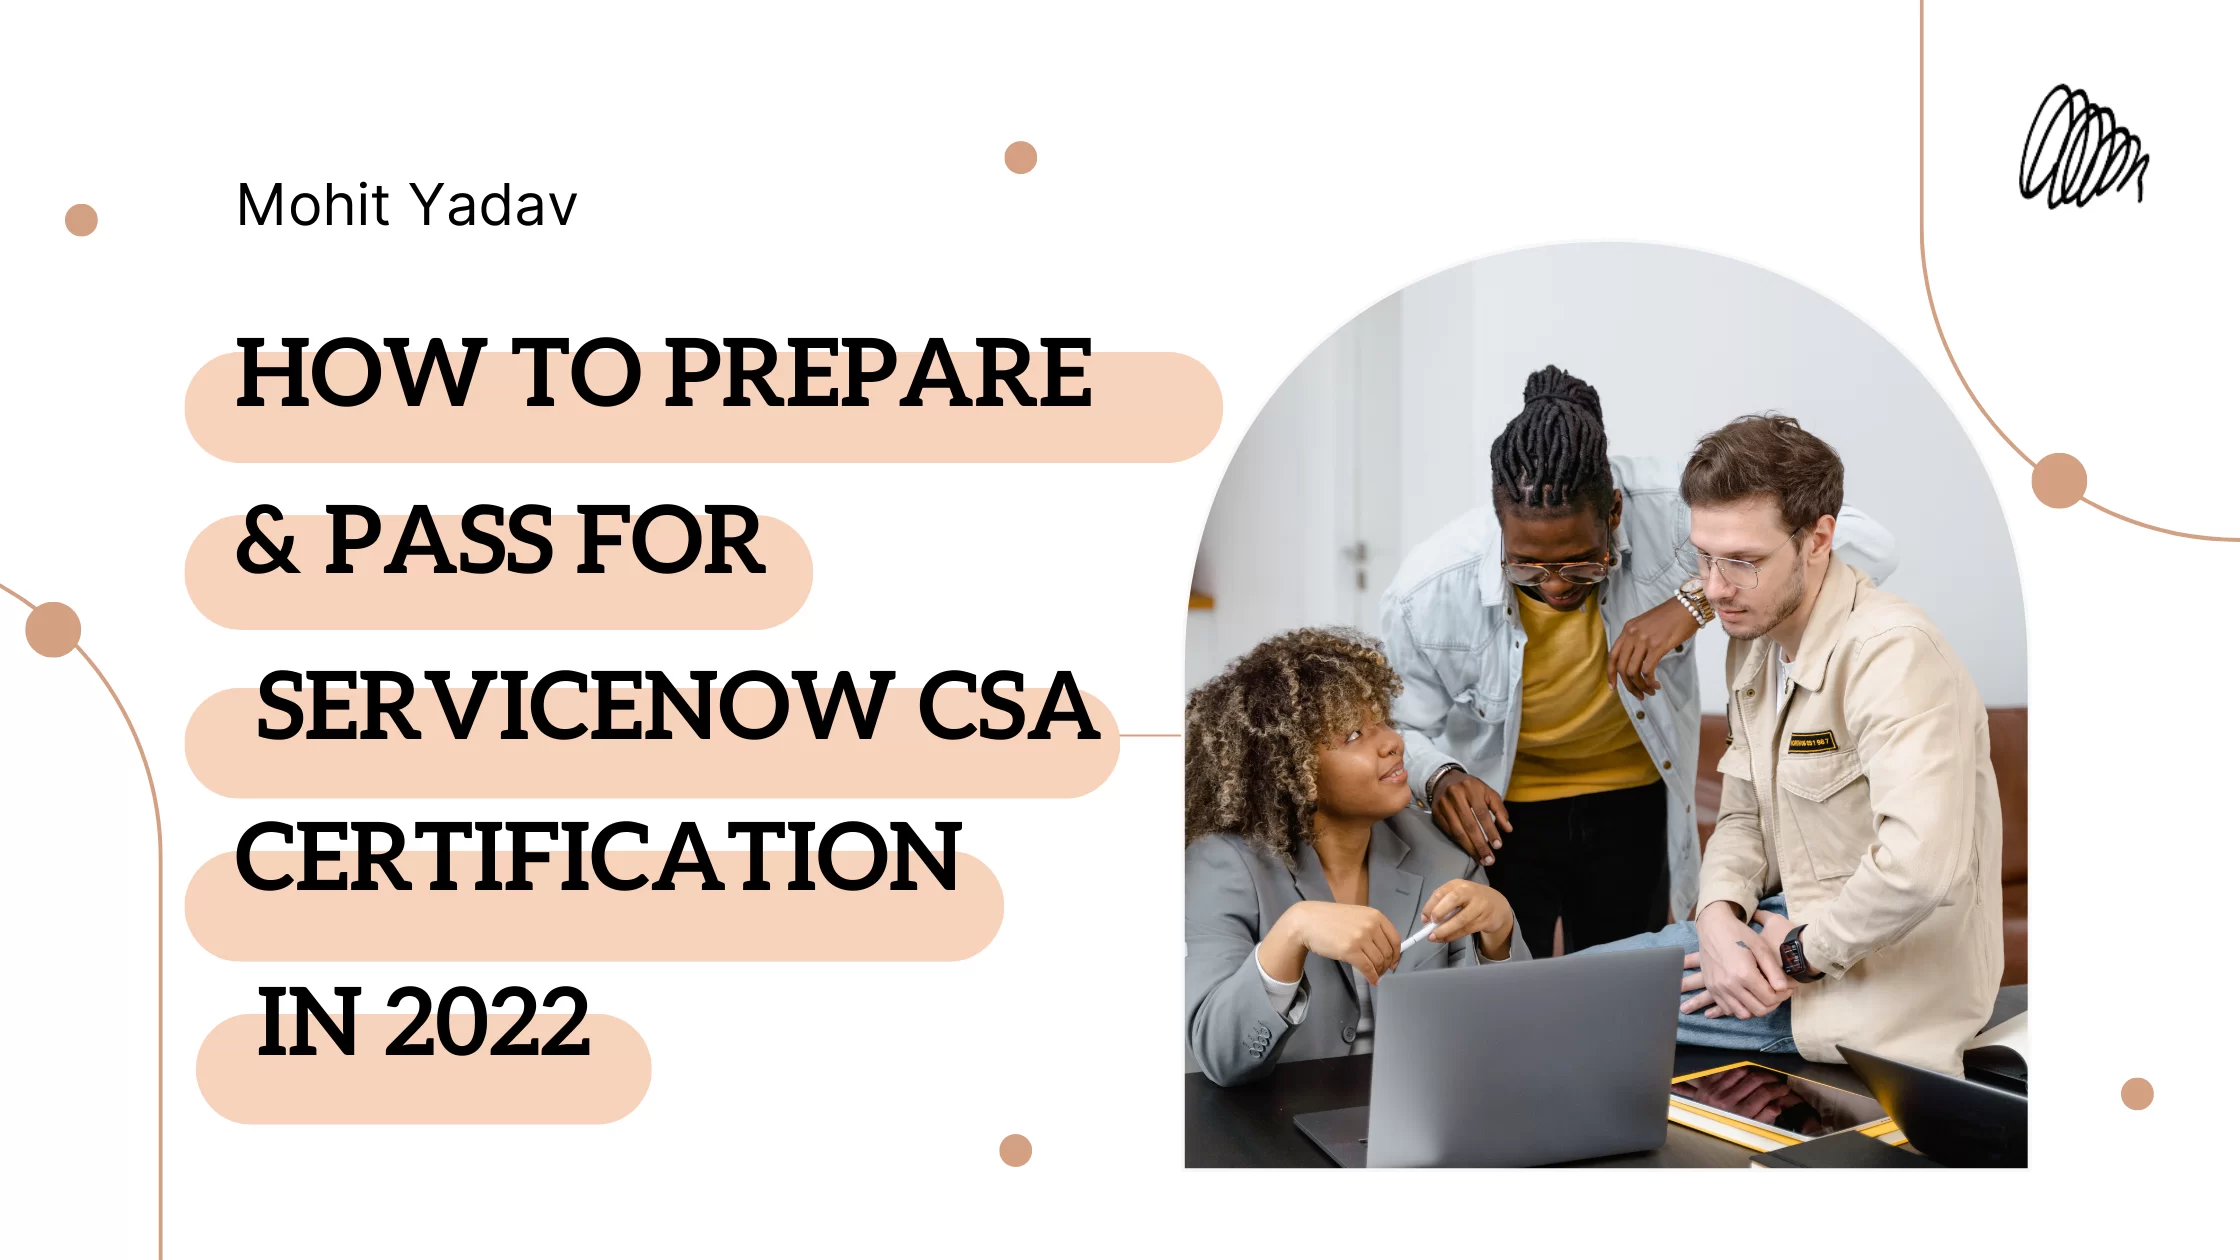 ServiceNow CSA Certification The Preparation Steps To Pass